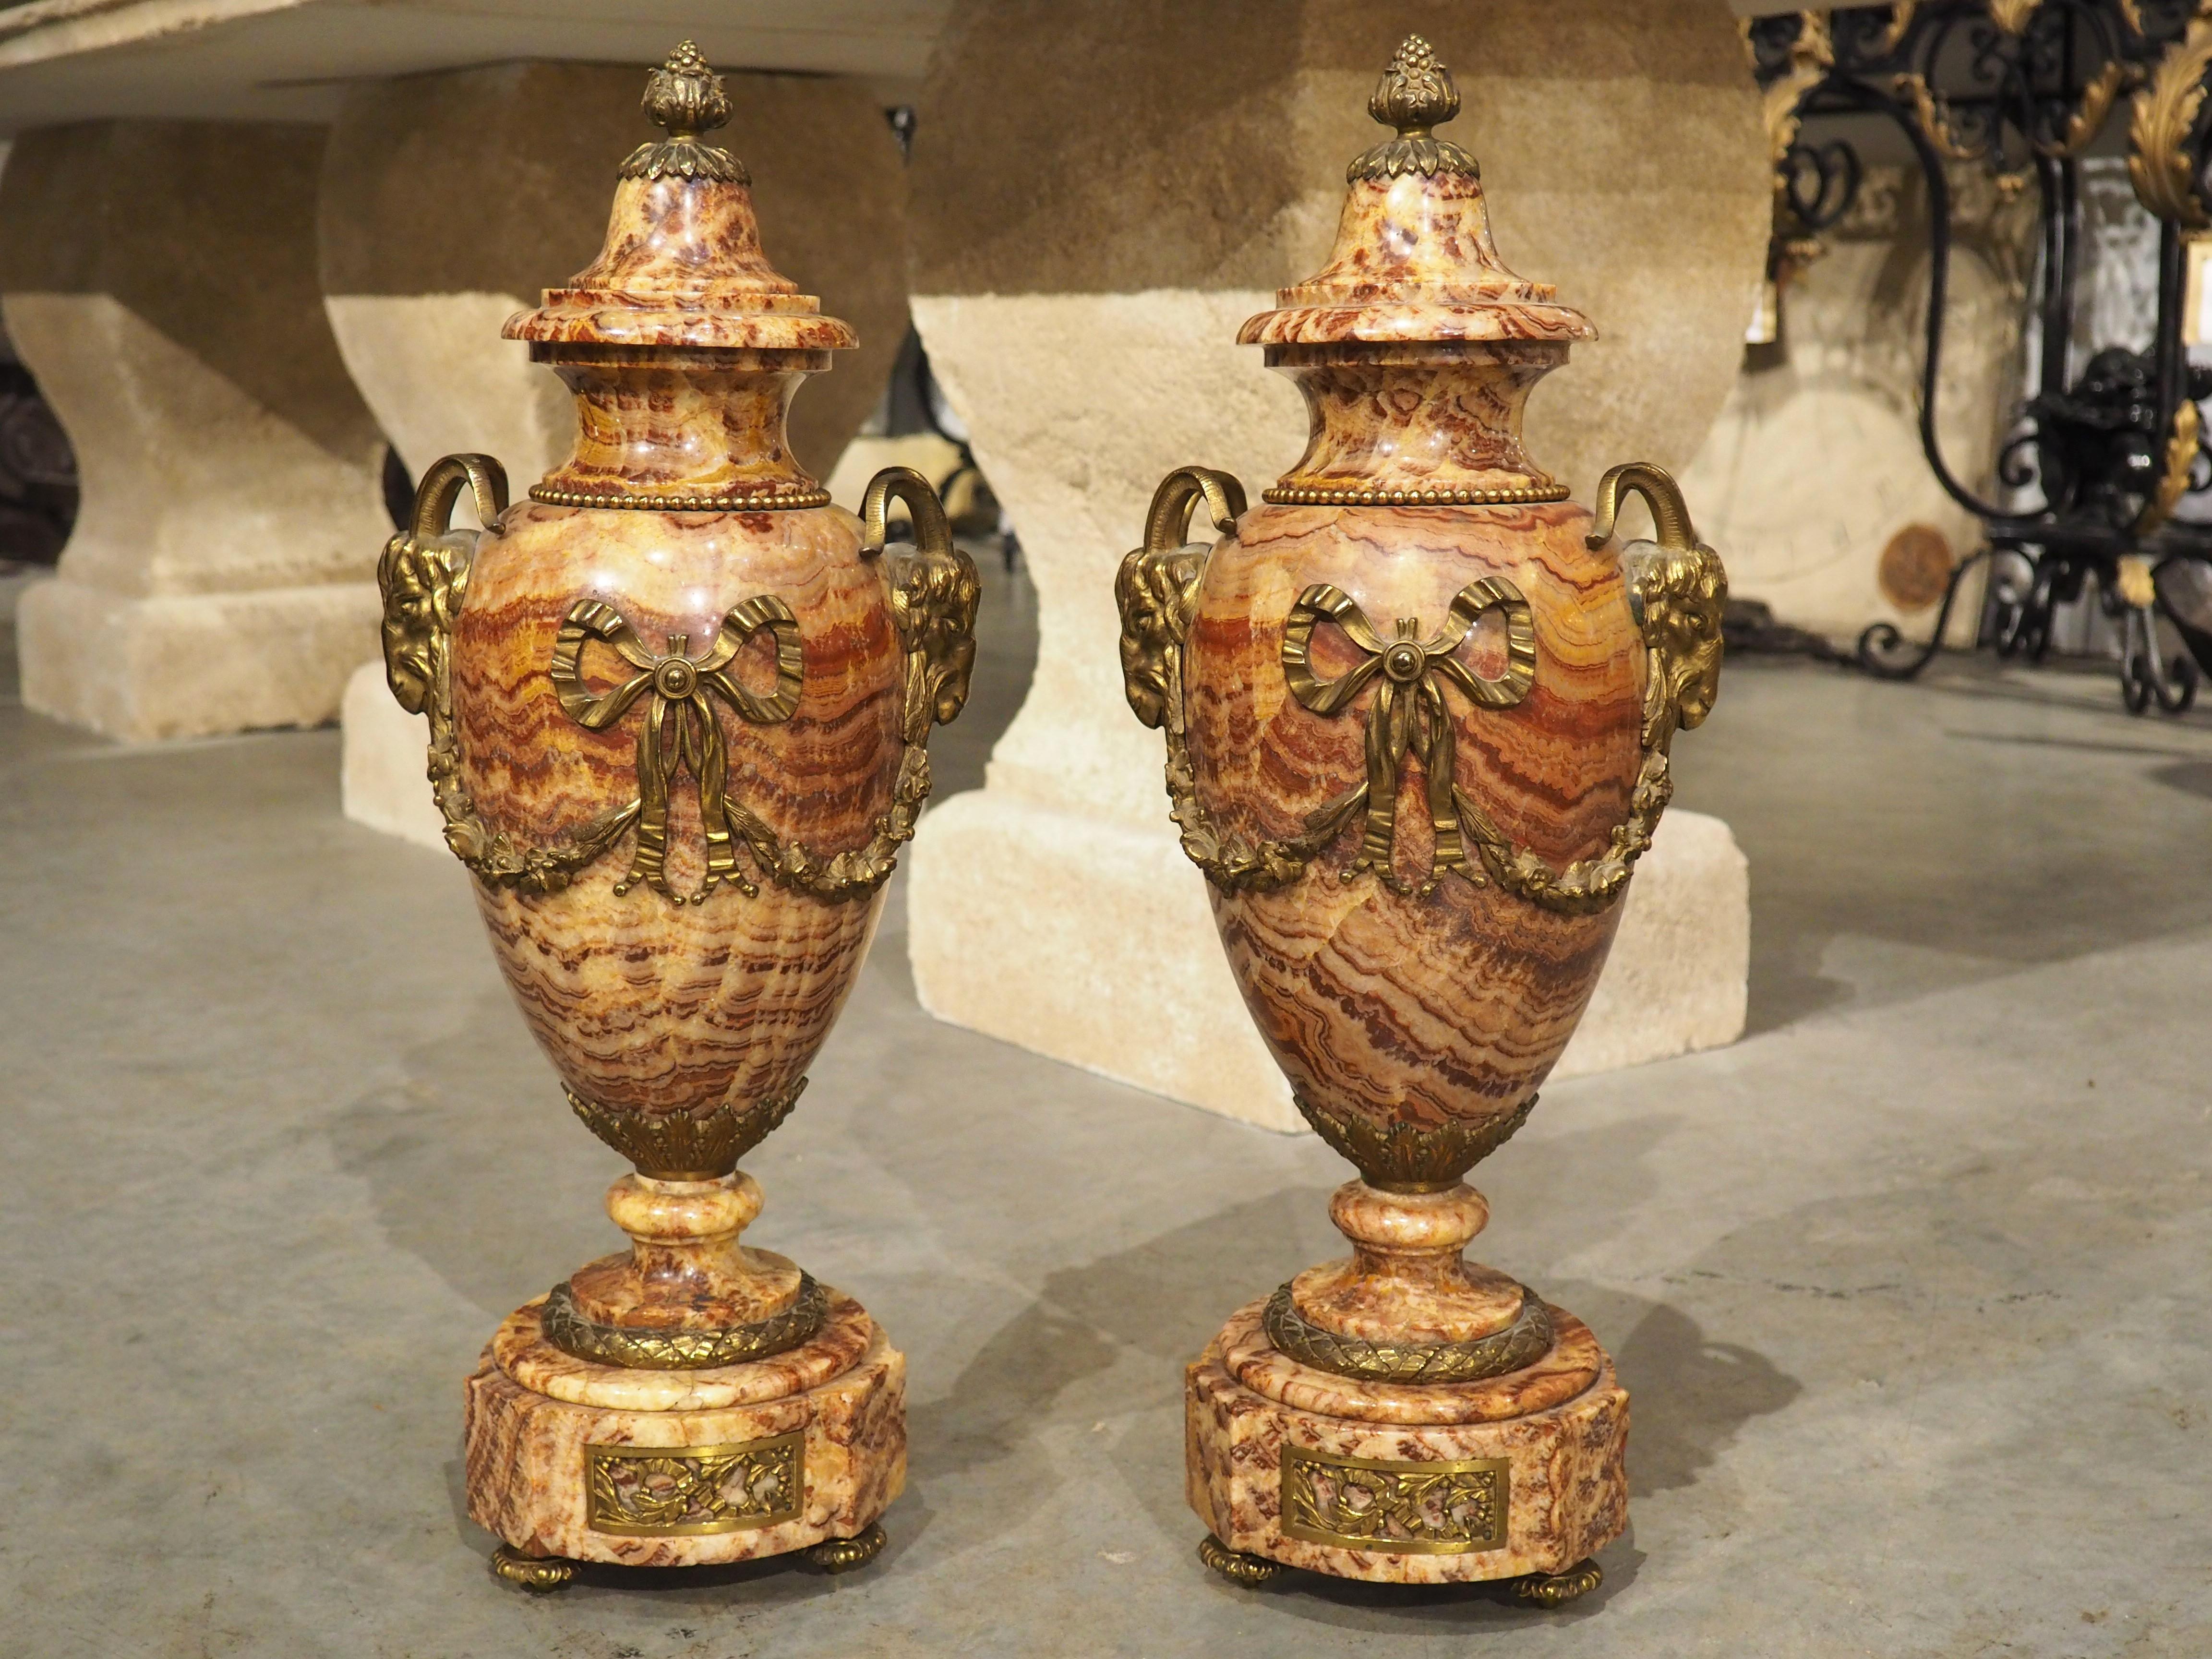 Although the origin of cassolettes can be traced back to ancient Europe and Asia, it was not until the late 18th century that cassolettes began to develop the urn-like form seen on this pair of marble and gilt bronze cassolettes. Our pair was